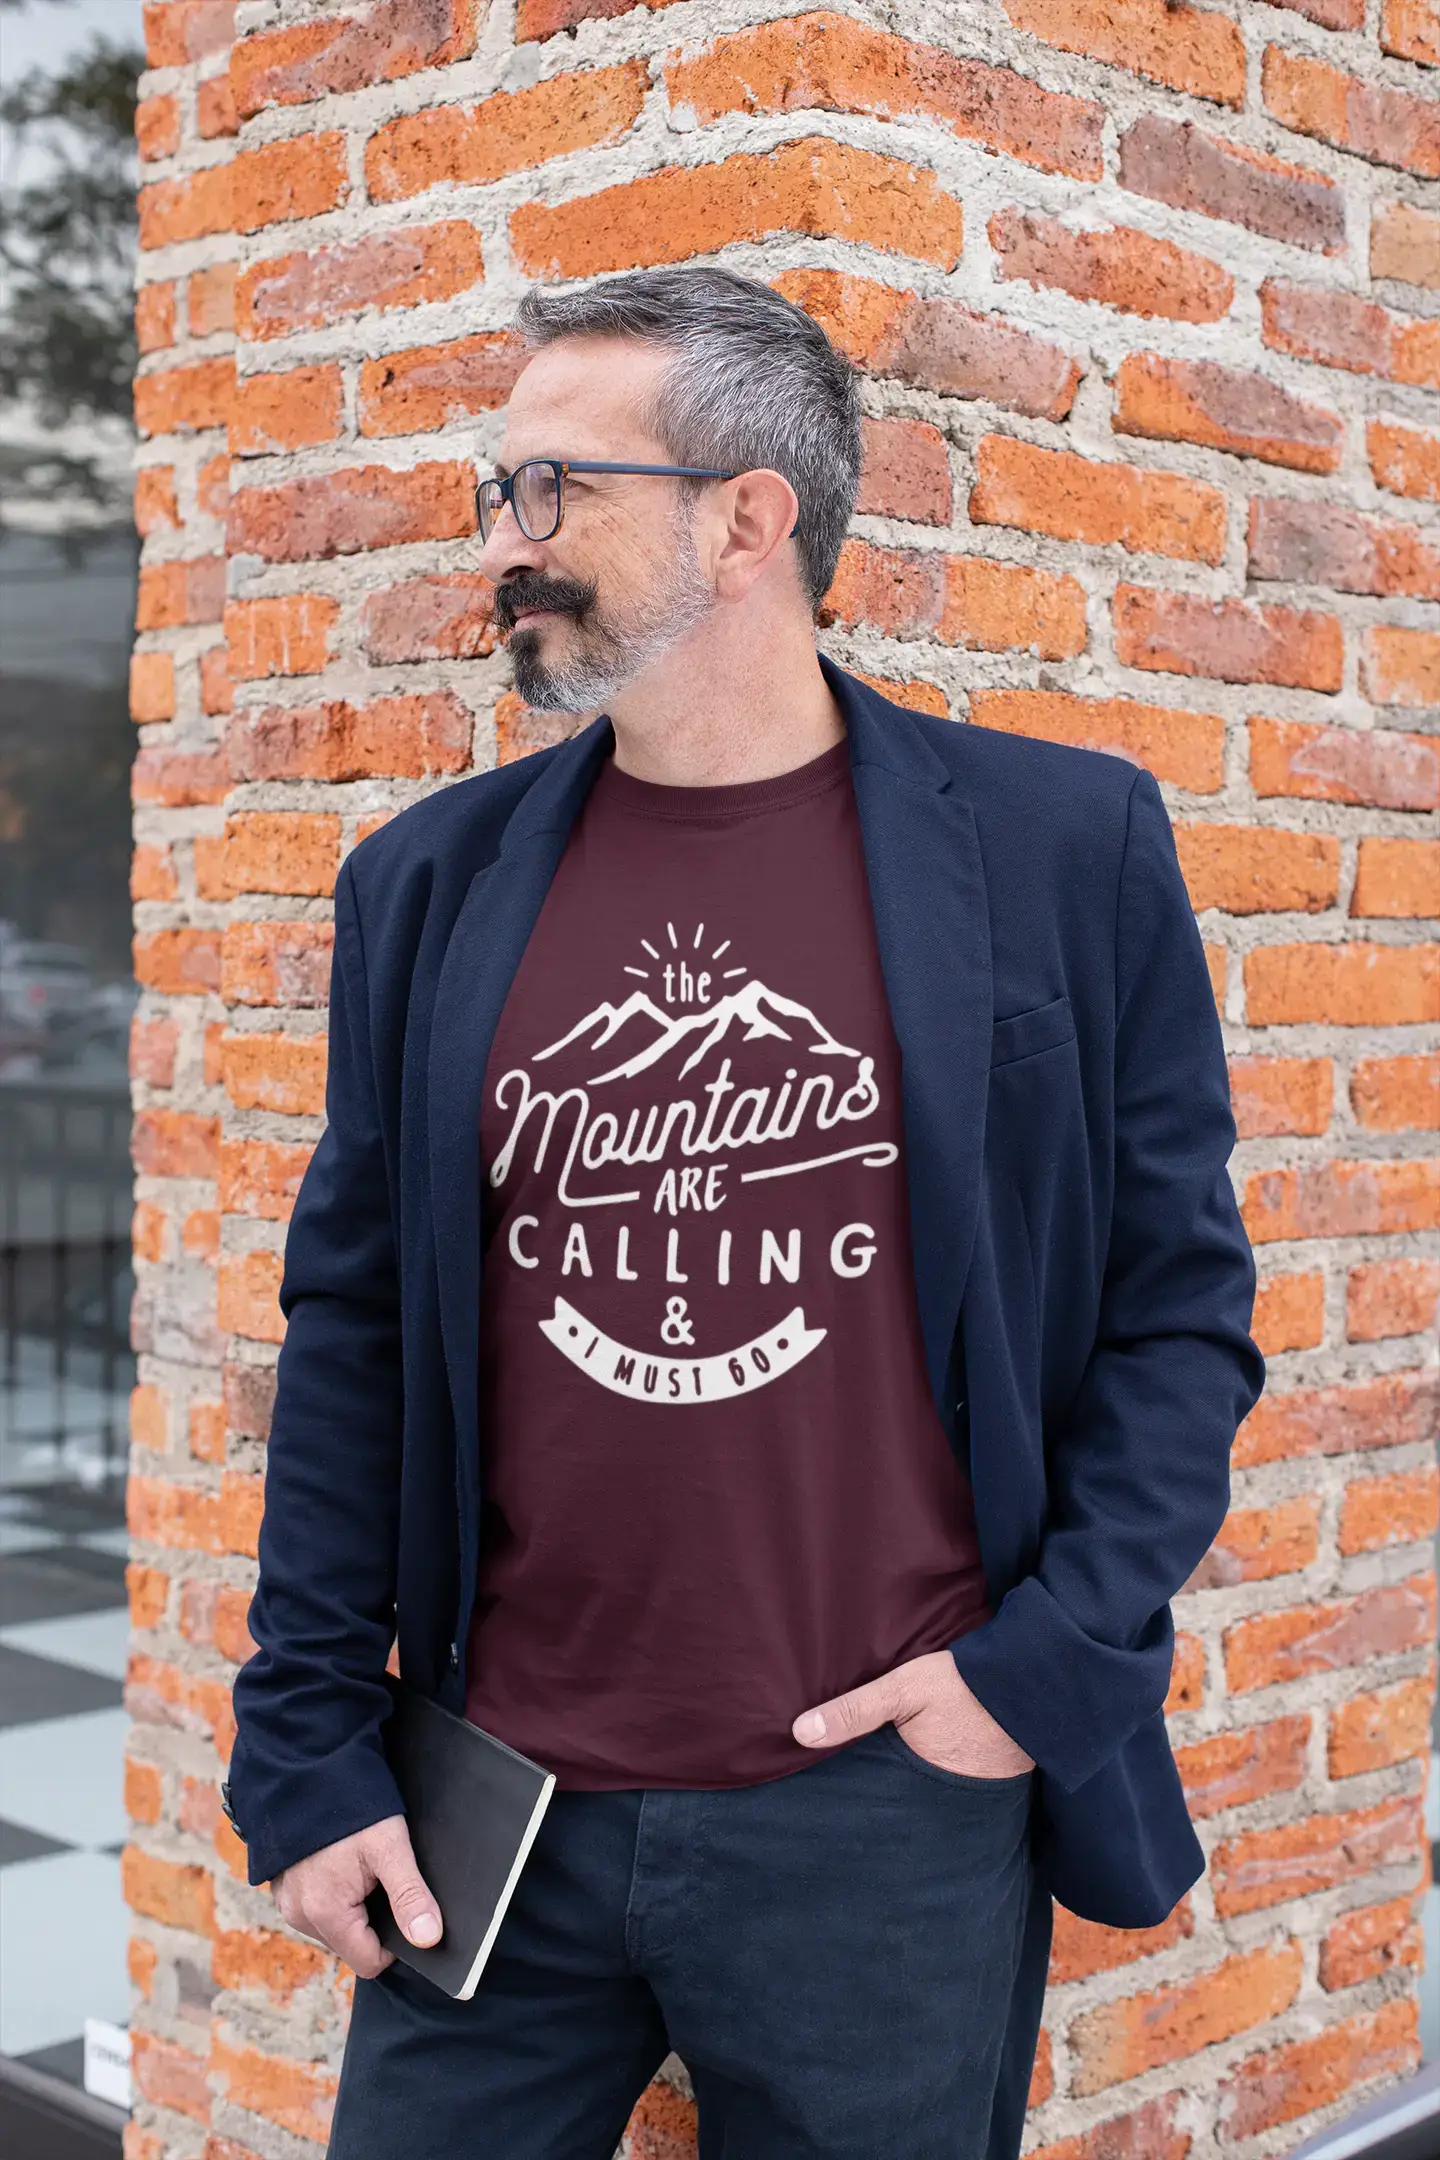 ULTRABASIC - Graphic Printed Men's The Mountains Are Calling And I Must Go Hiking Tee Vintage White